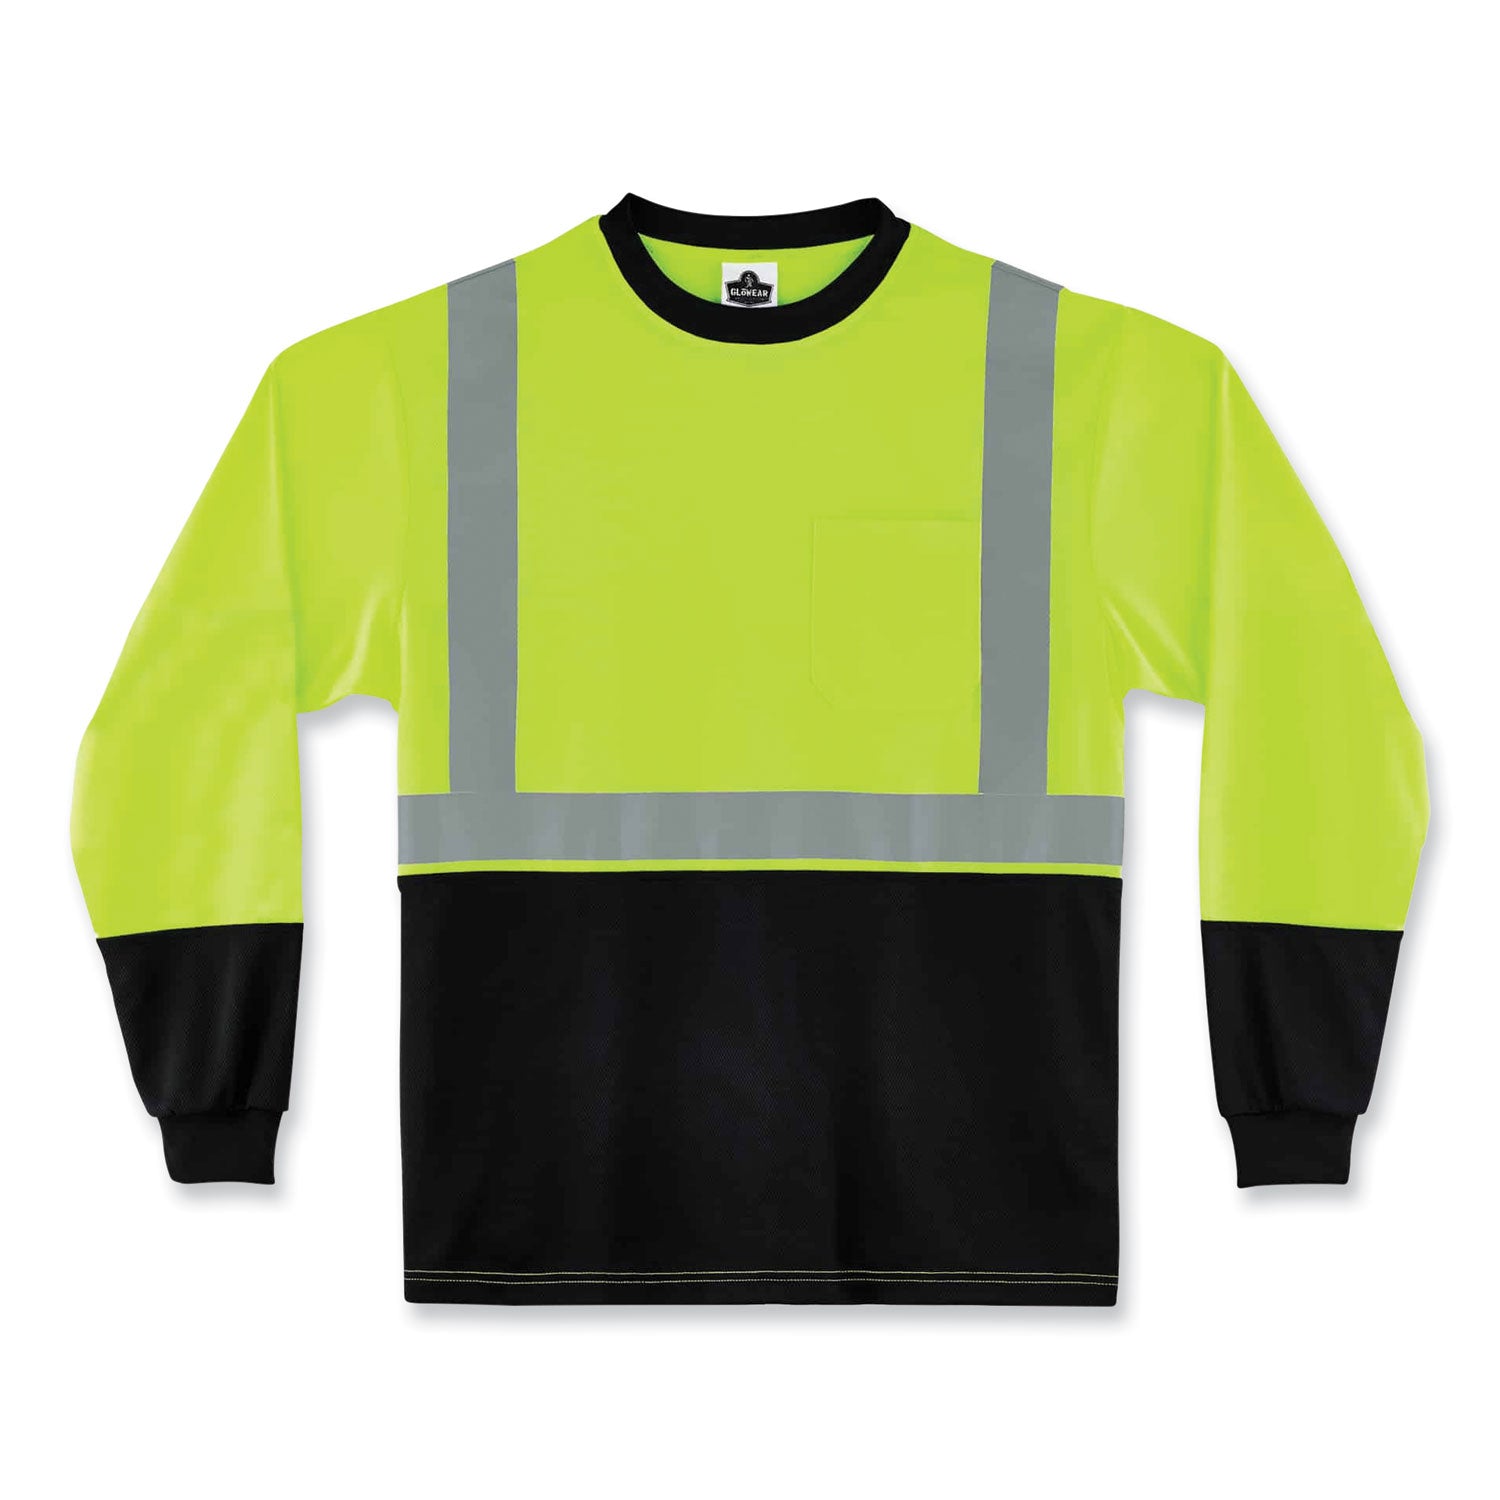 glowear-8291bk-type-r-class-2-black-front-long-sleeve-t-shirt-polyester-small-lime-ships-in-1-3-business-days_ego22702 - 1